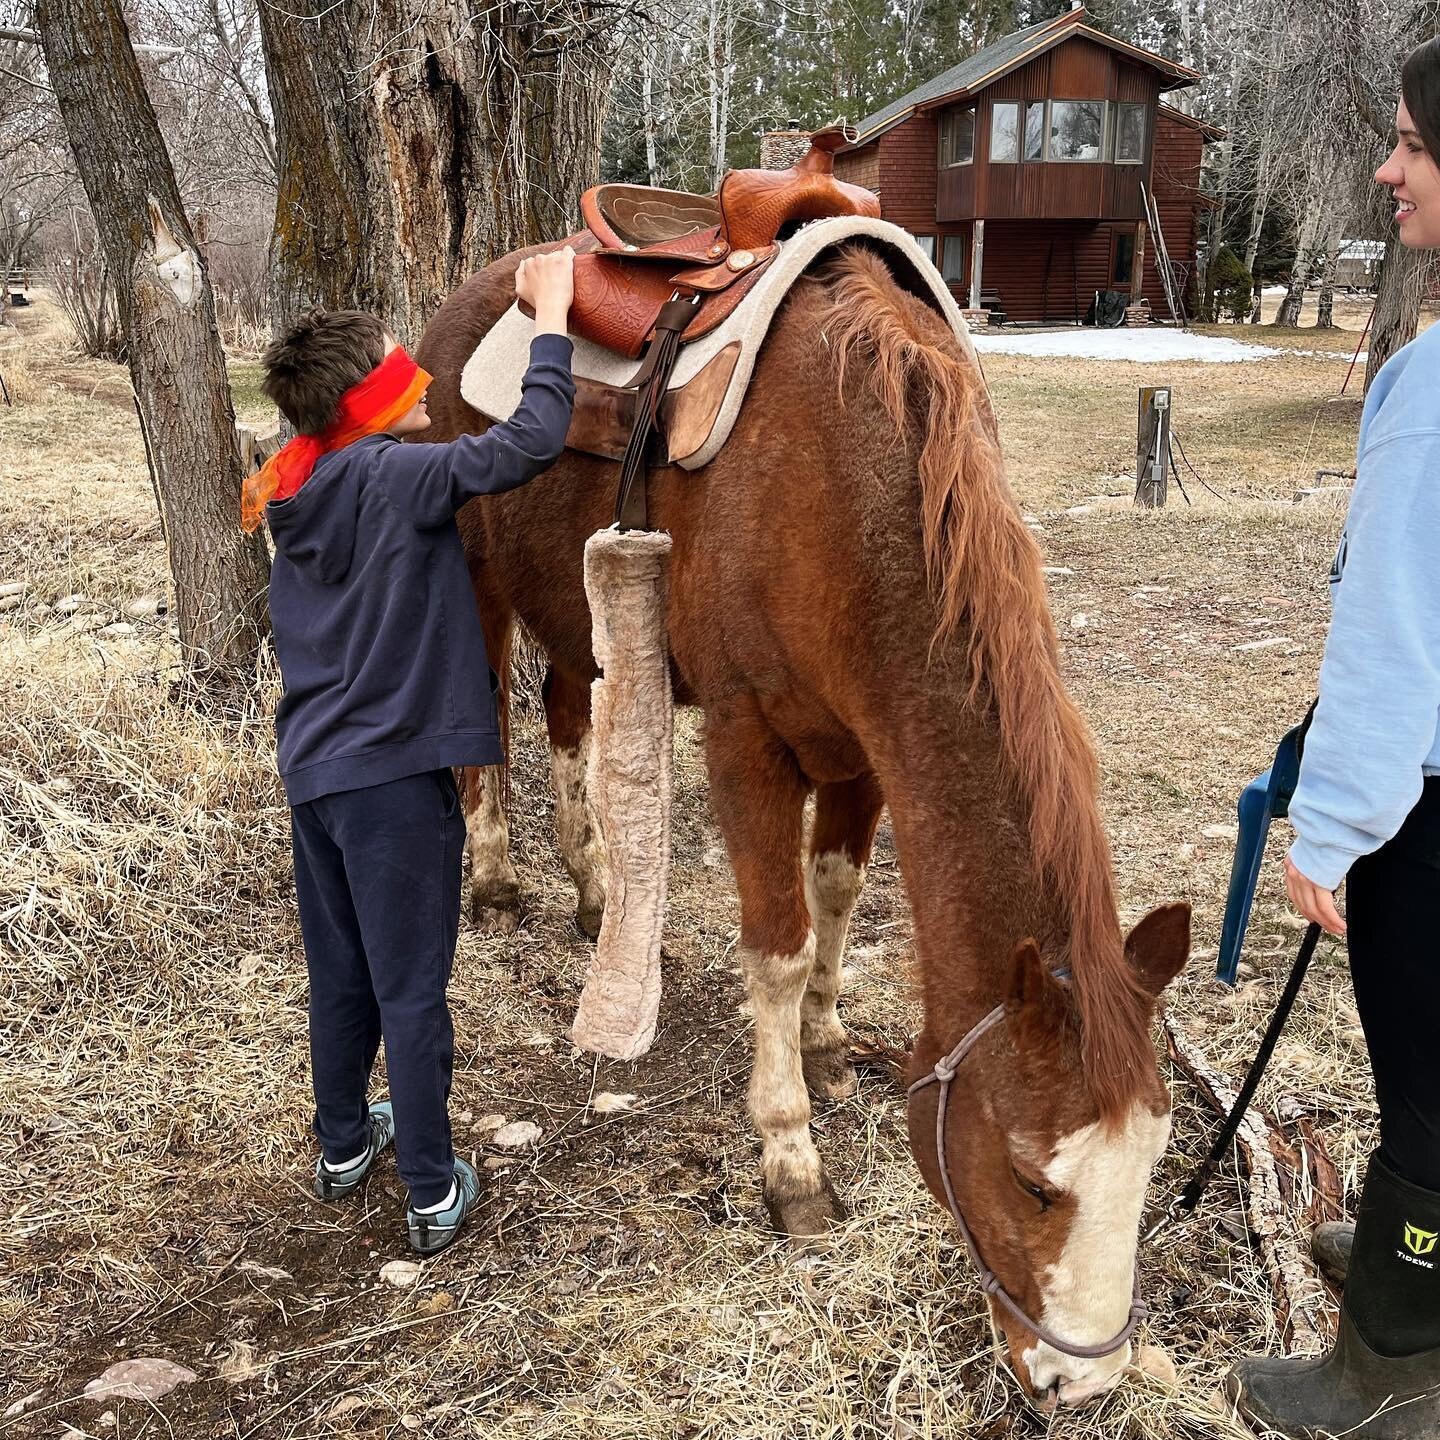 Do you think you could tack a horse blindfolded? Tacking up can be tricky to learn, but being blindfolded takes even more memory, body awareness, and use of your other senses!

#equinetherapy #recreationtherapy #animalassistedtherapy #animalassistedl